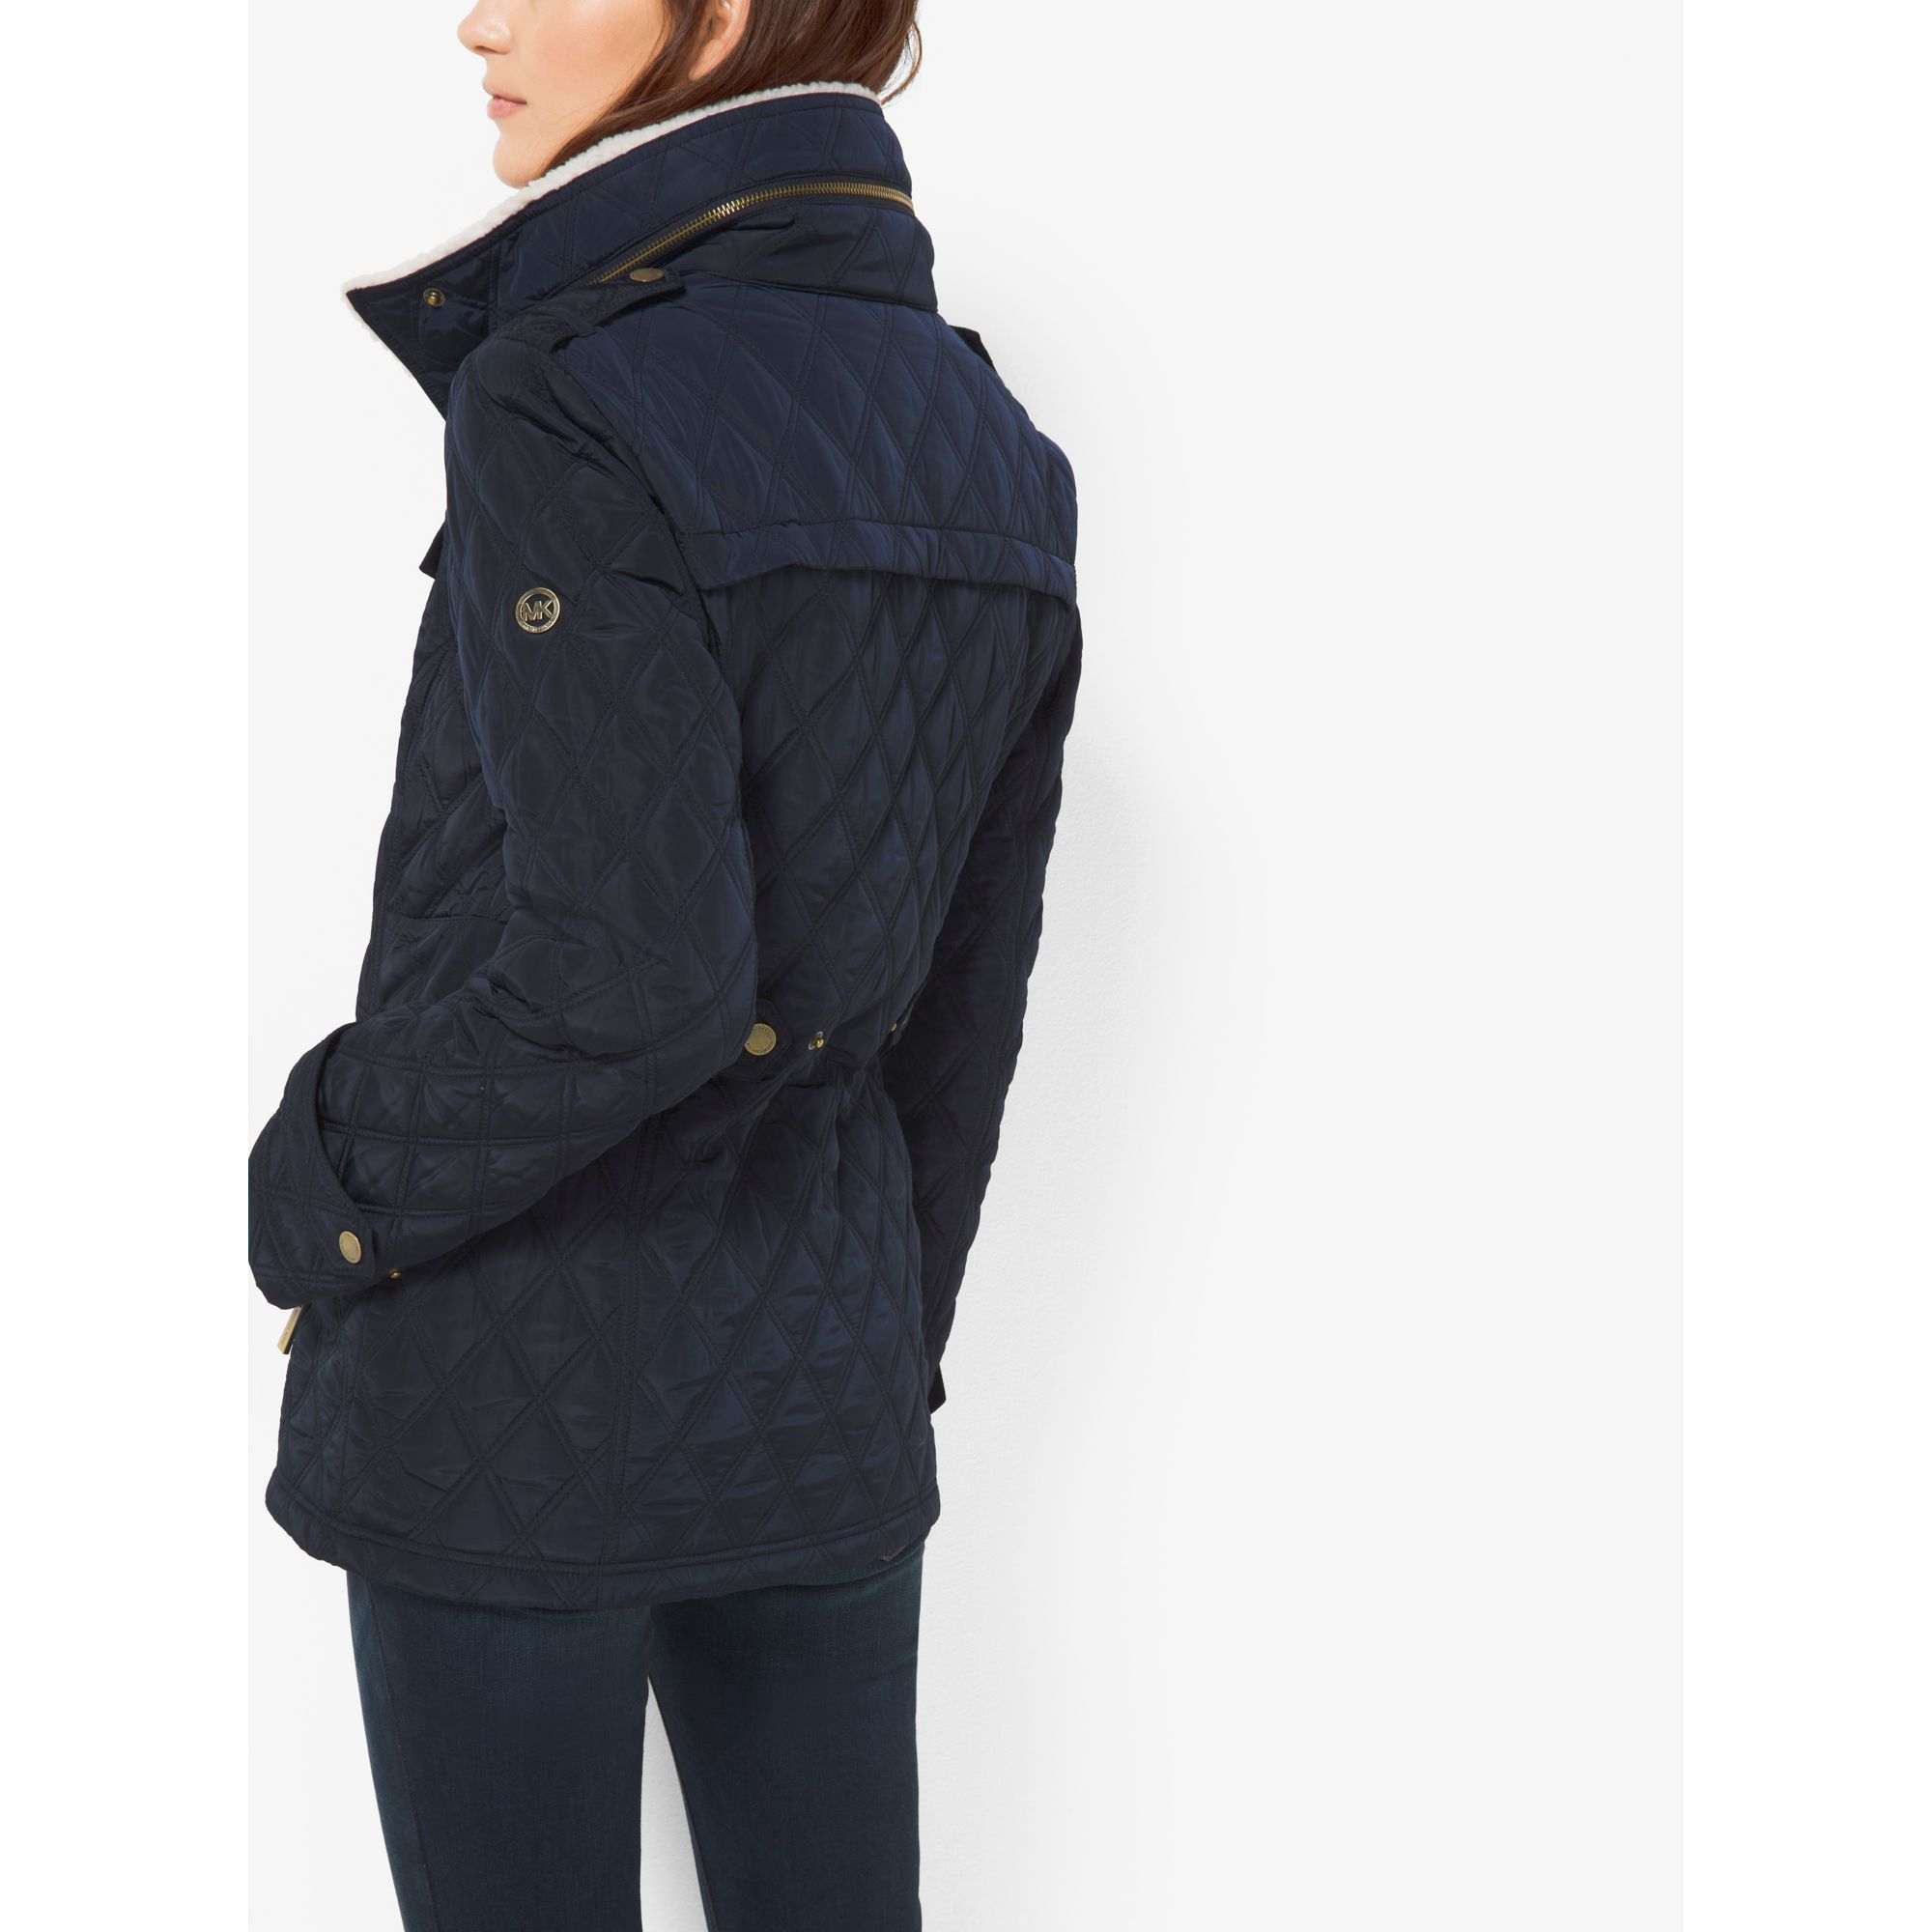 Michael Kors Fleece-collared Quilted Jacket in Navy (Blue) - Lyst